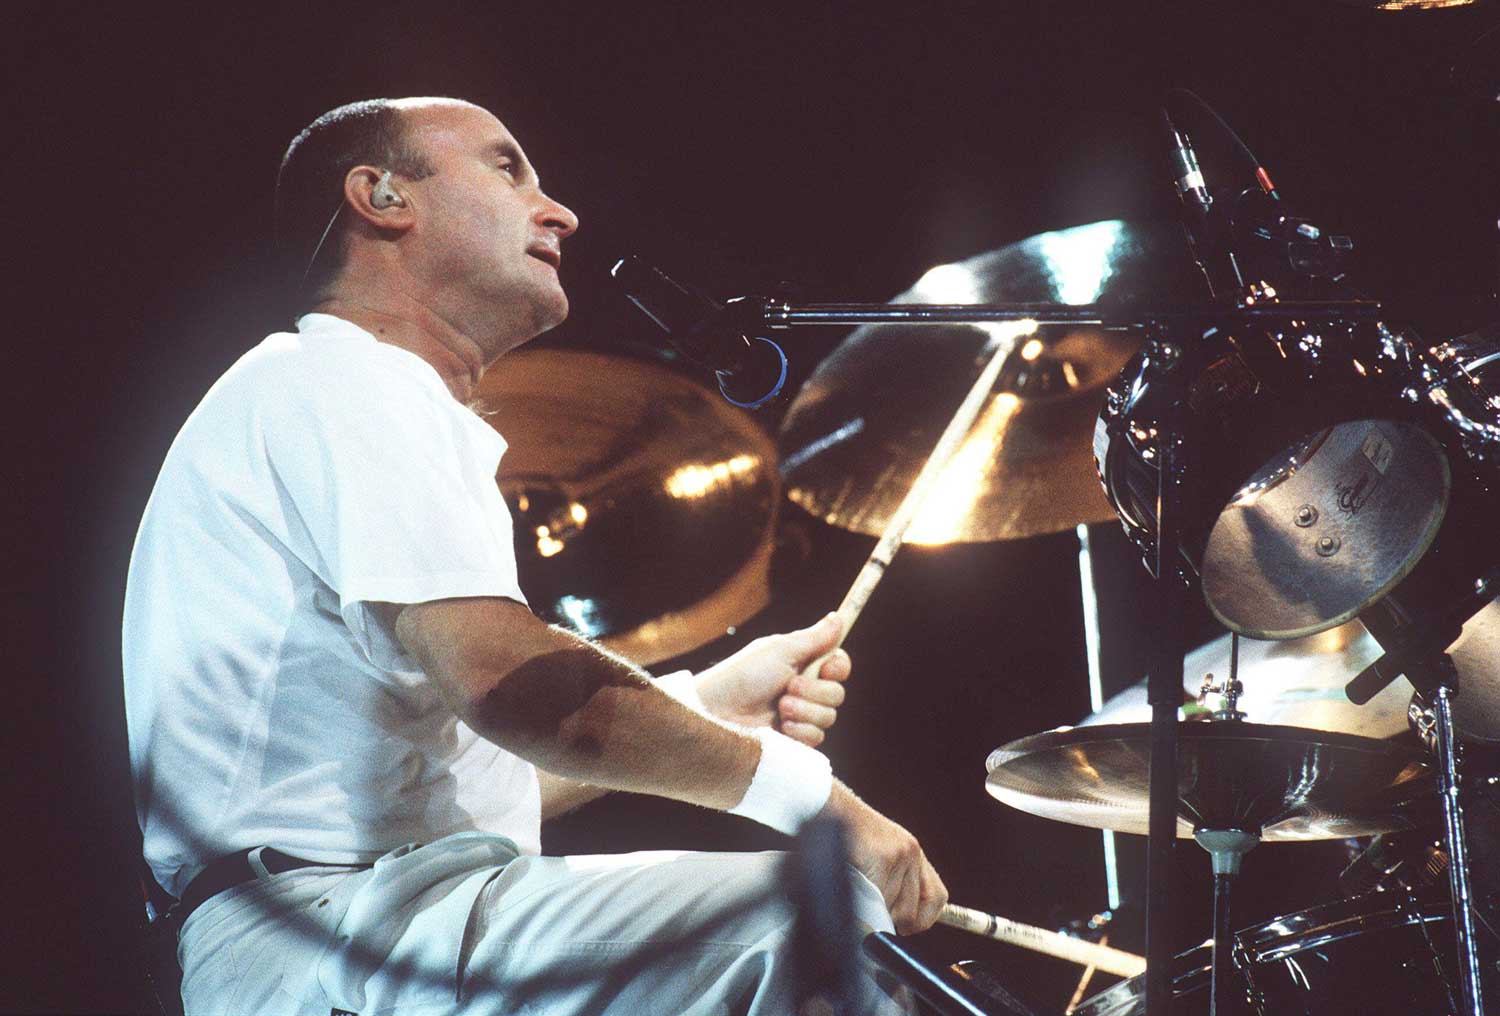 Against All Odds - Phil Collins #80s #flashback #musica